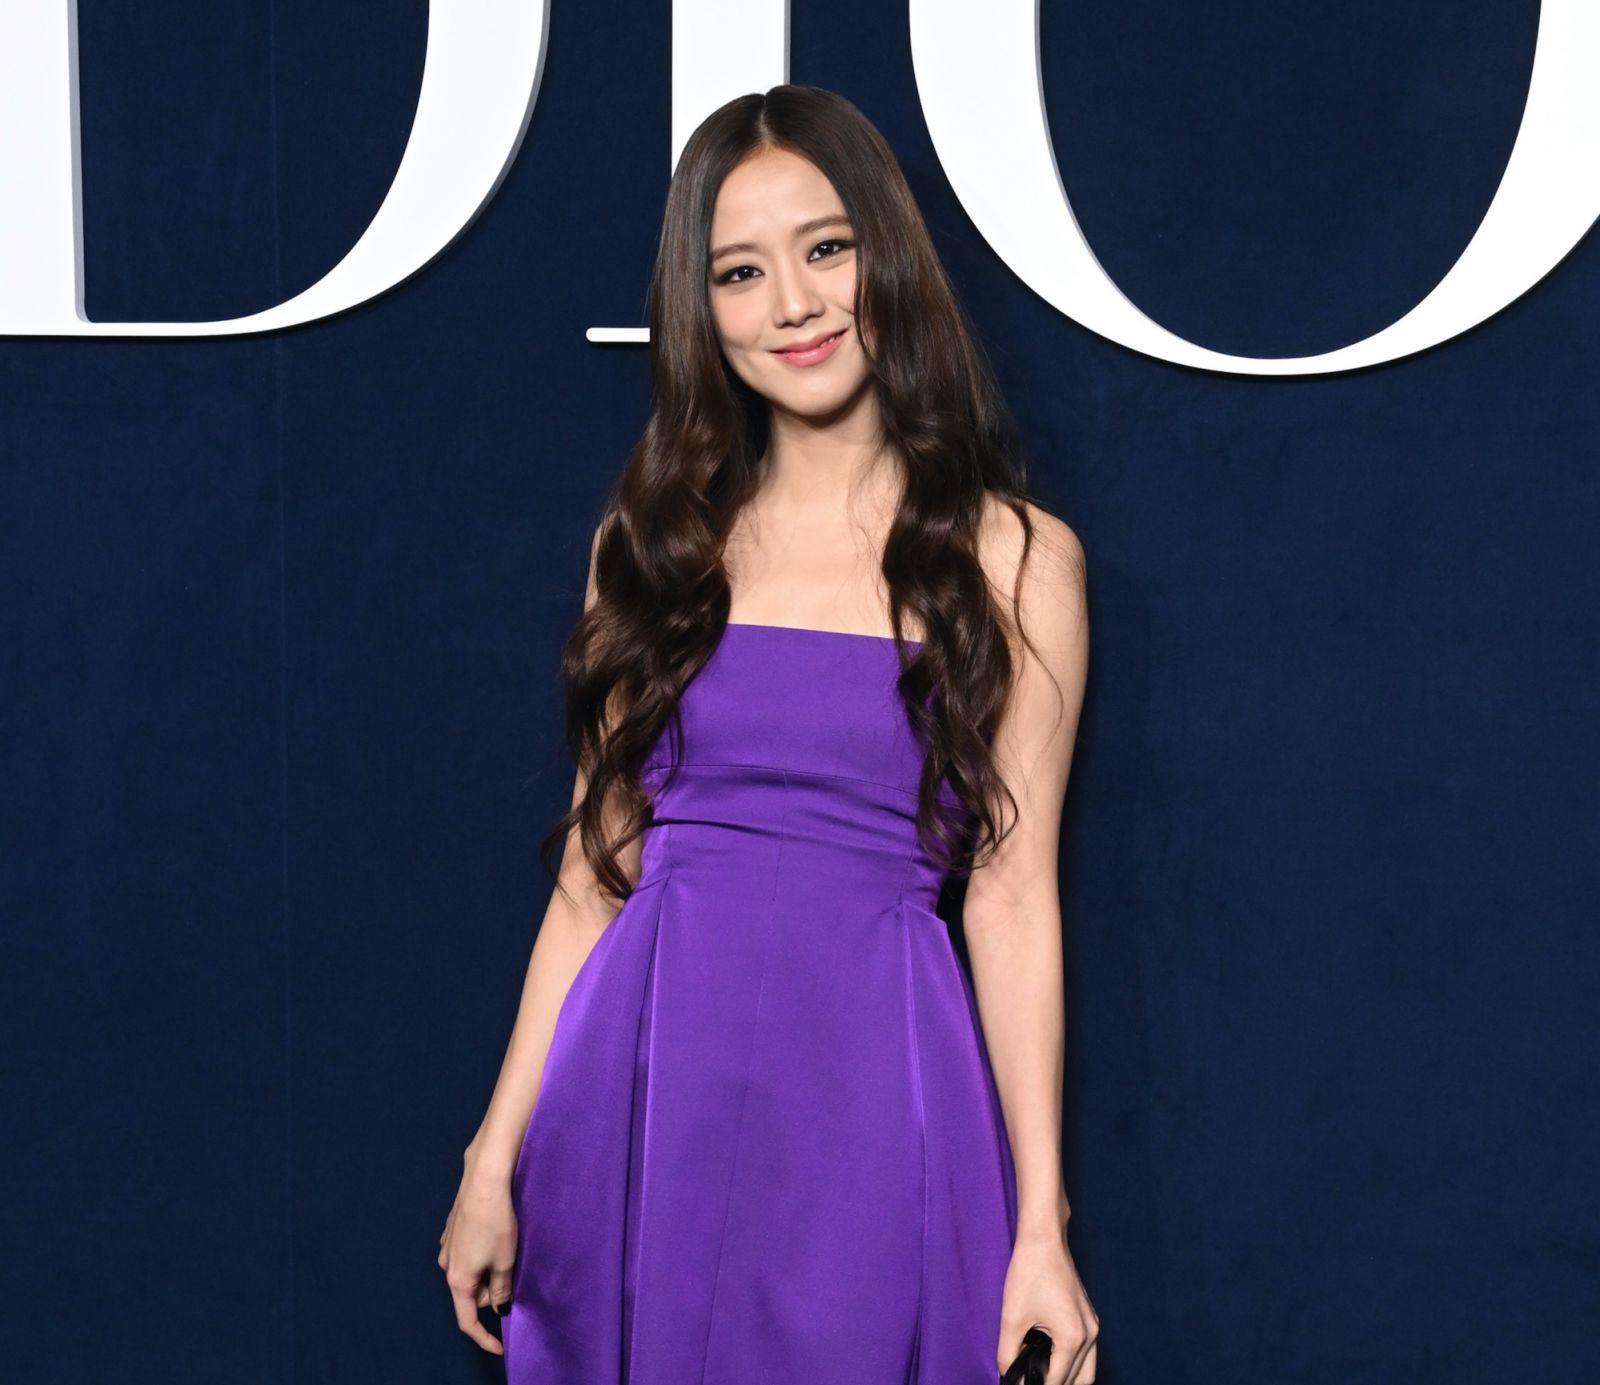 Blackpink S Jisoo Attends Dior Show With A Striking Colour Choice